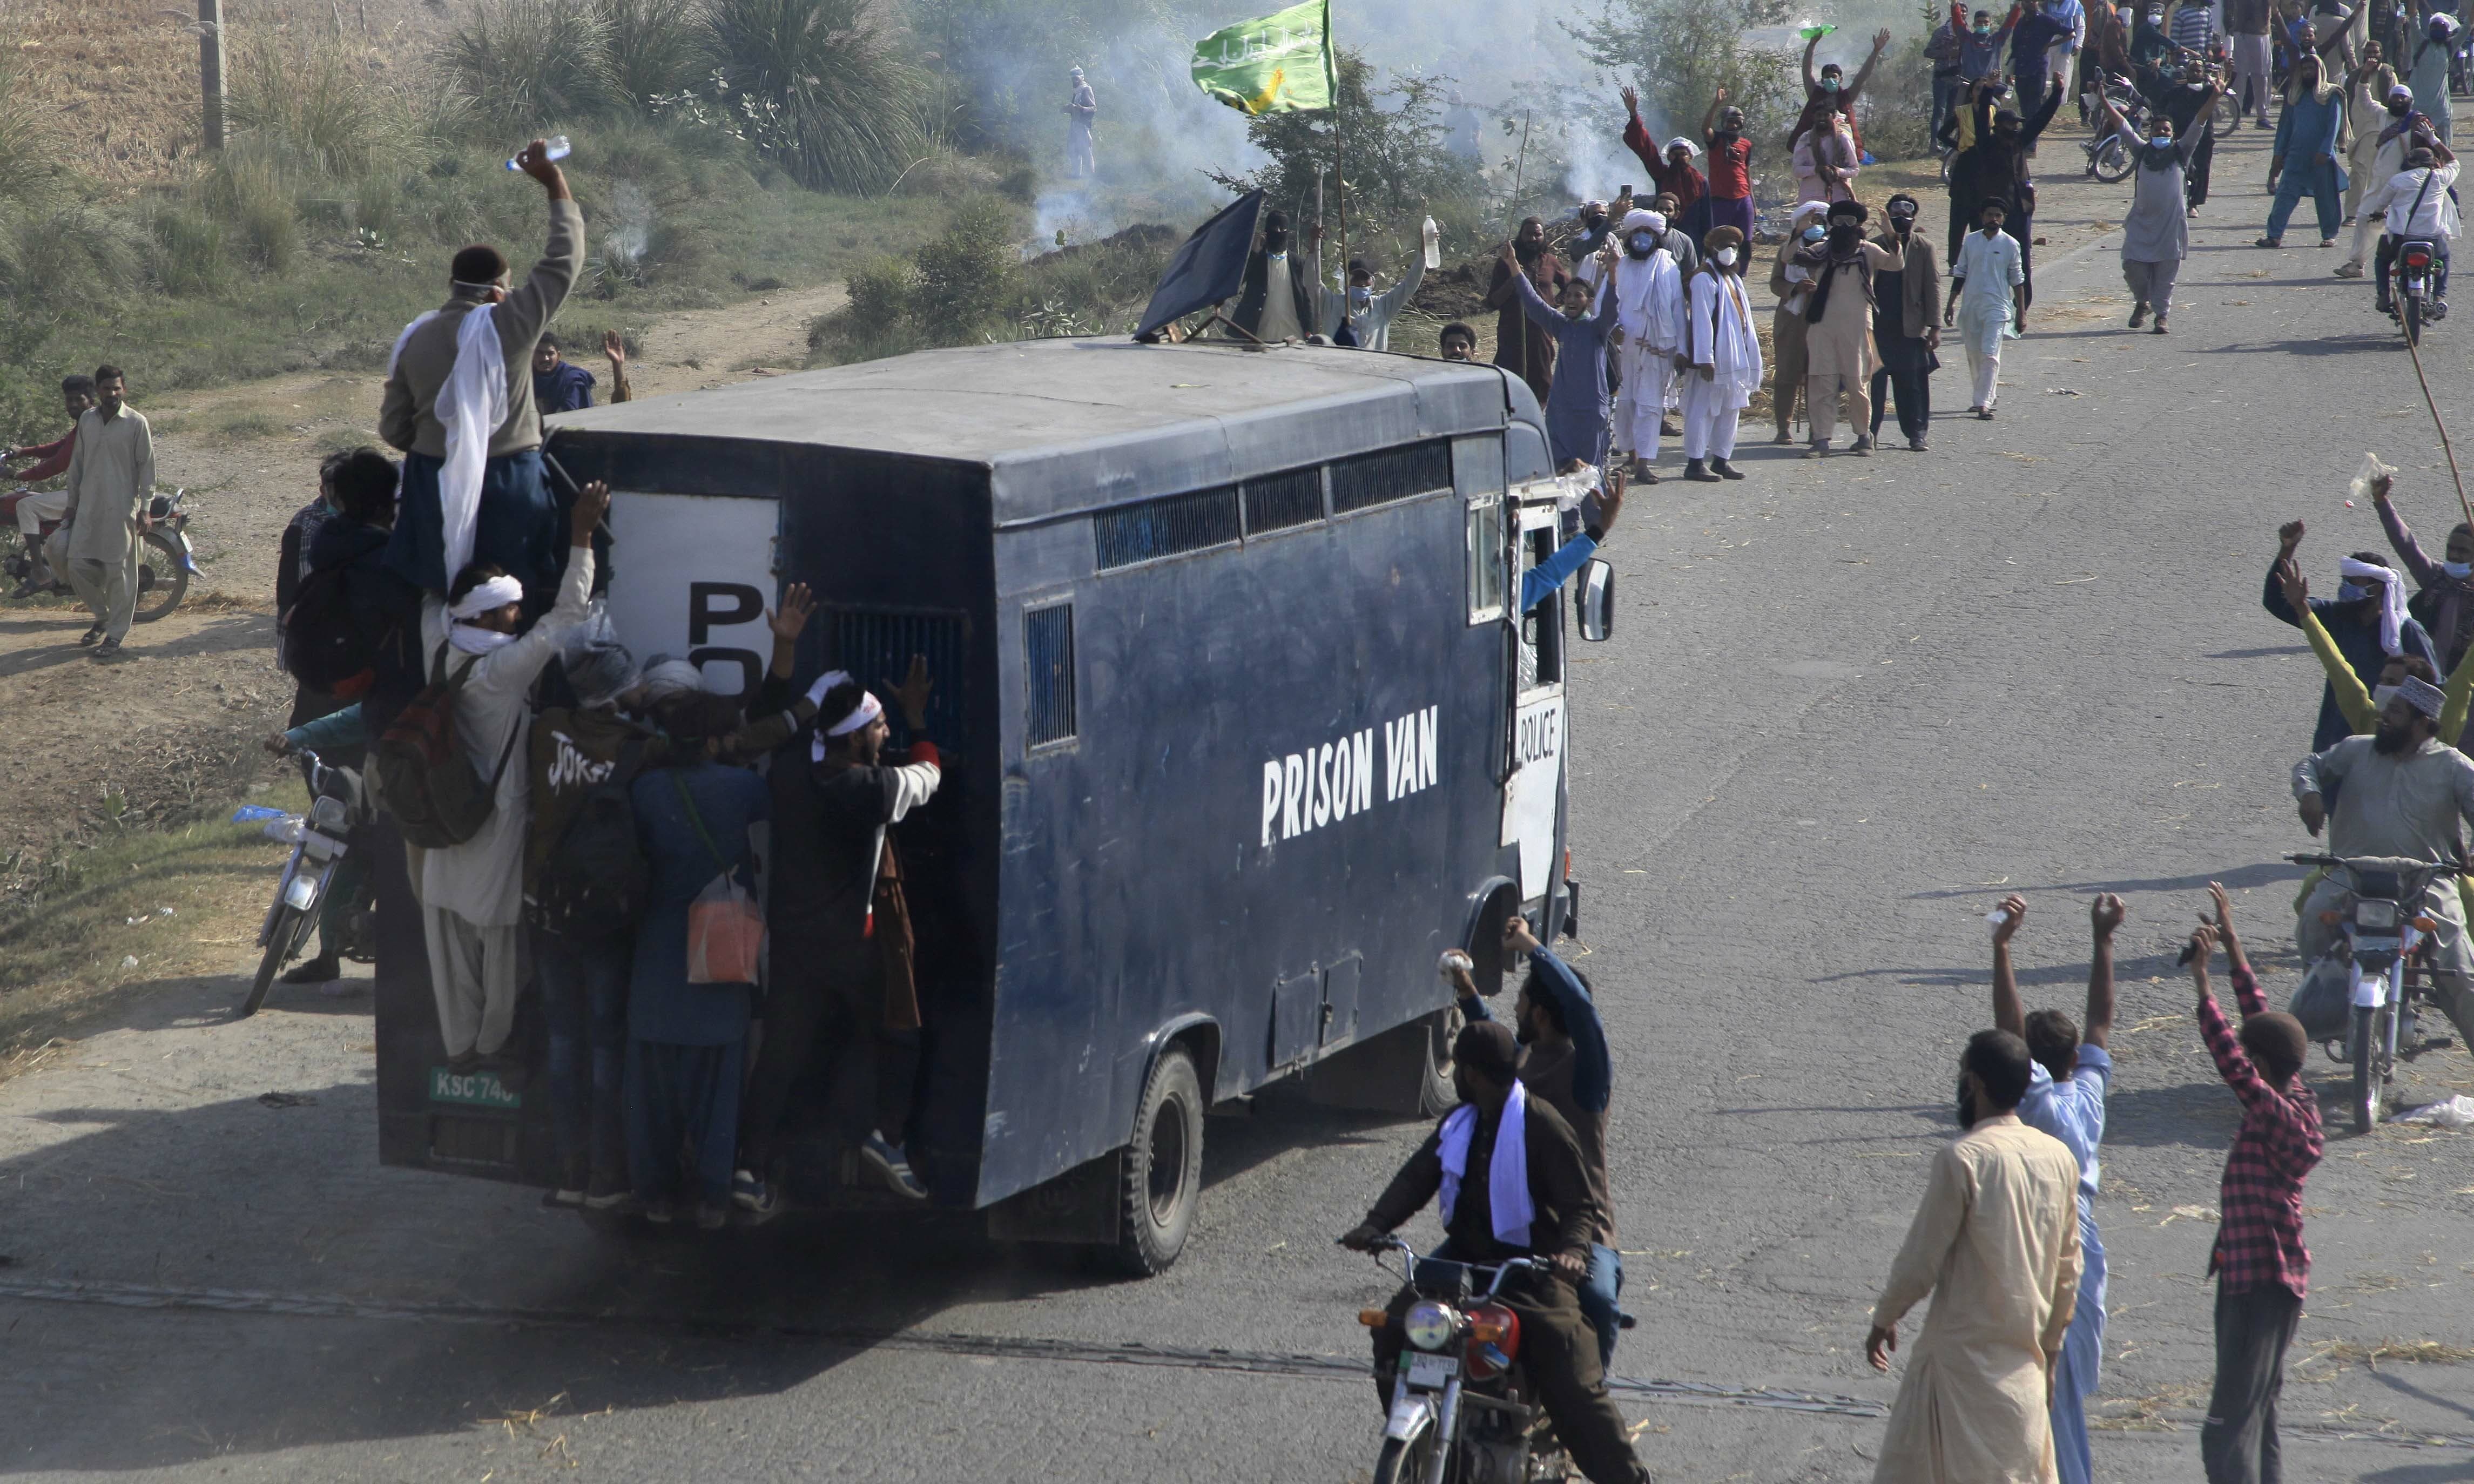 Tehreek-i-Labbaik Pakistan supporters celebrate after capturing a police vehicle during their protest march toward Islamabad, on a highway in the town of Sadhoke on Wednesday. — AP